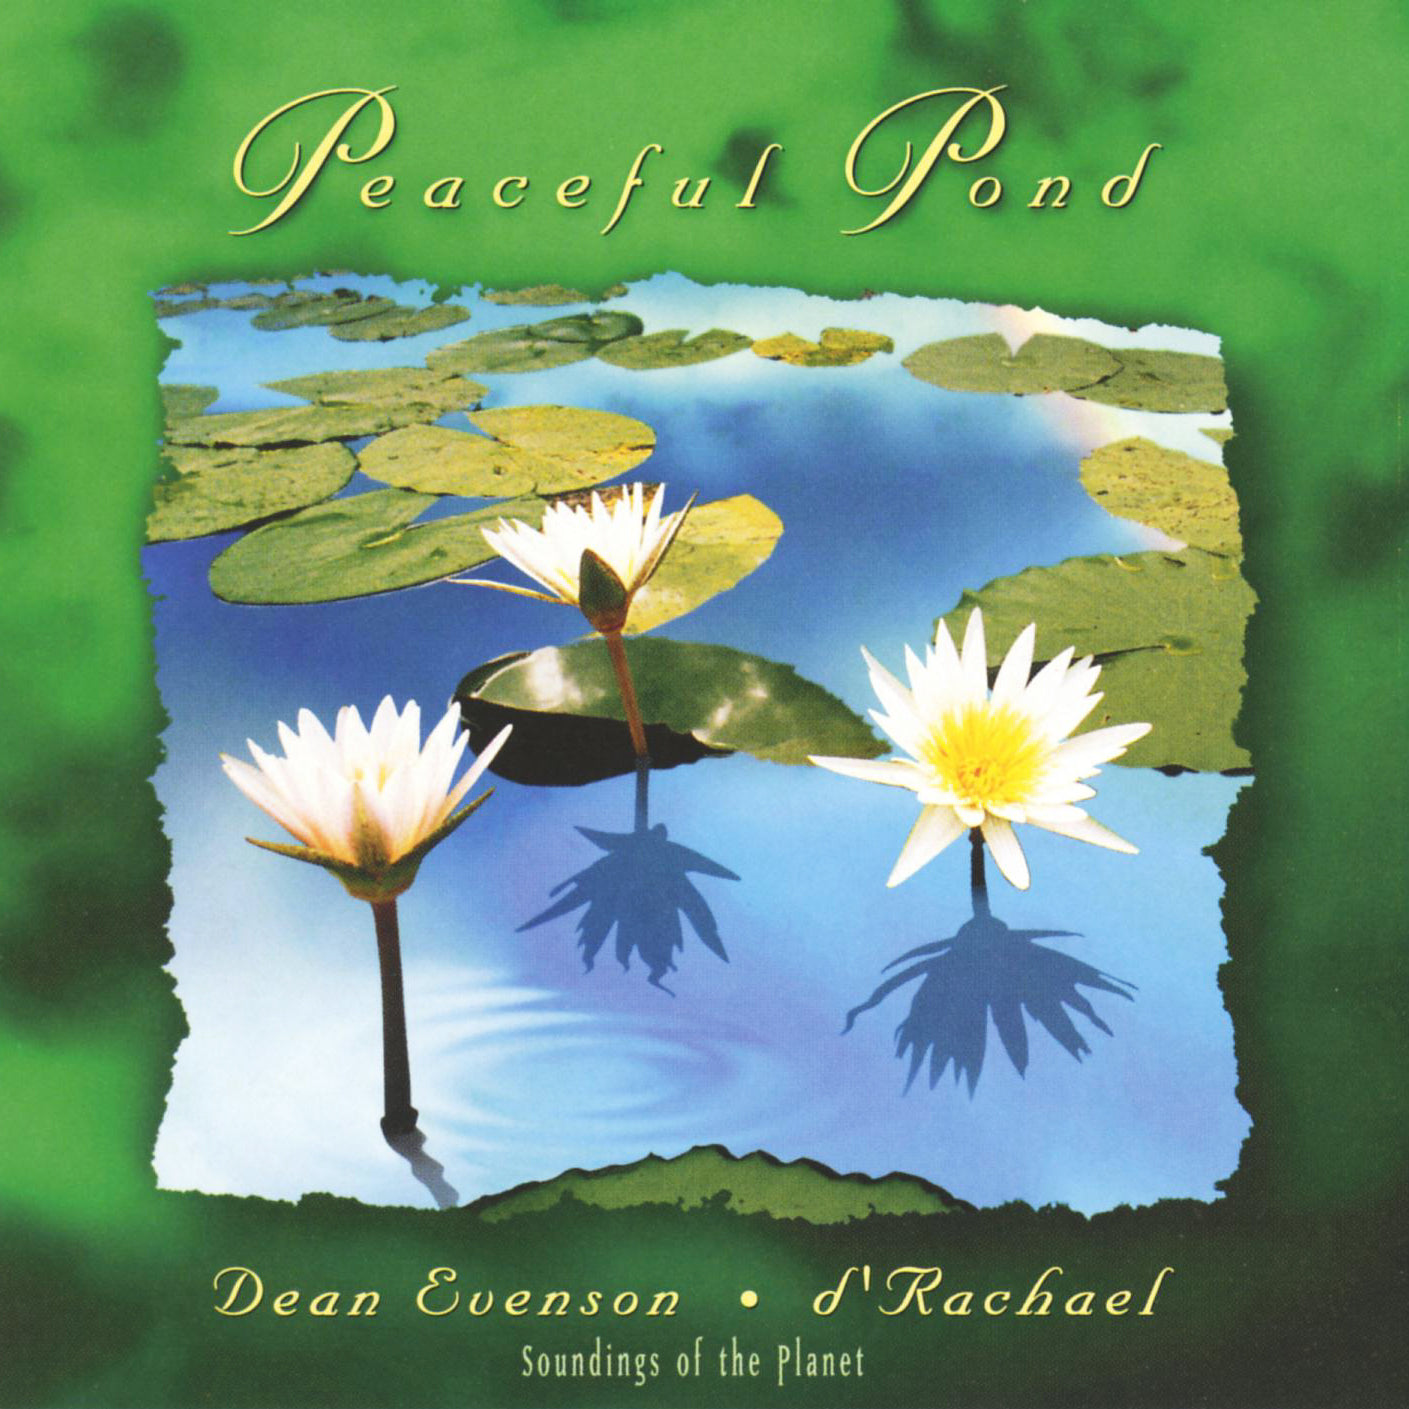 Peaceful Pond by Dean Evenson and d'Rachael Soundings of the Planet